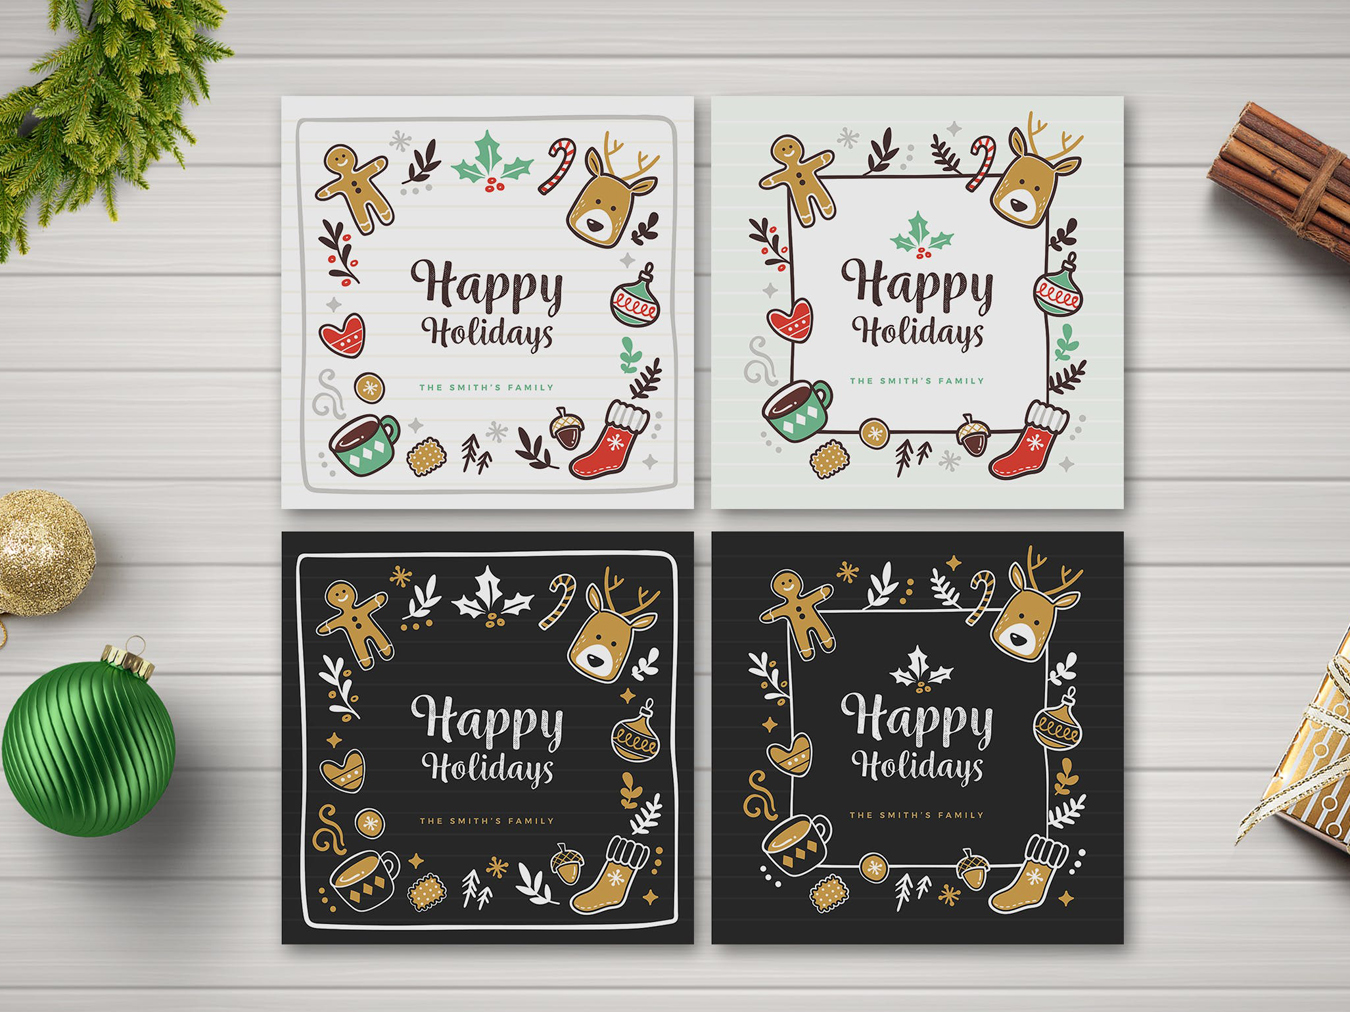 Company Holiday Cards For Every Budget | Ignite the Stoke